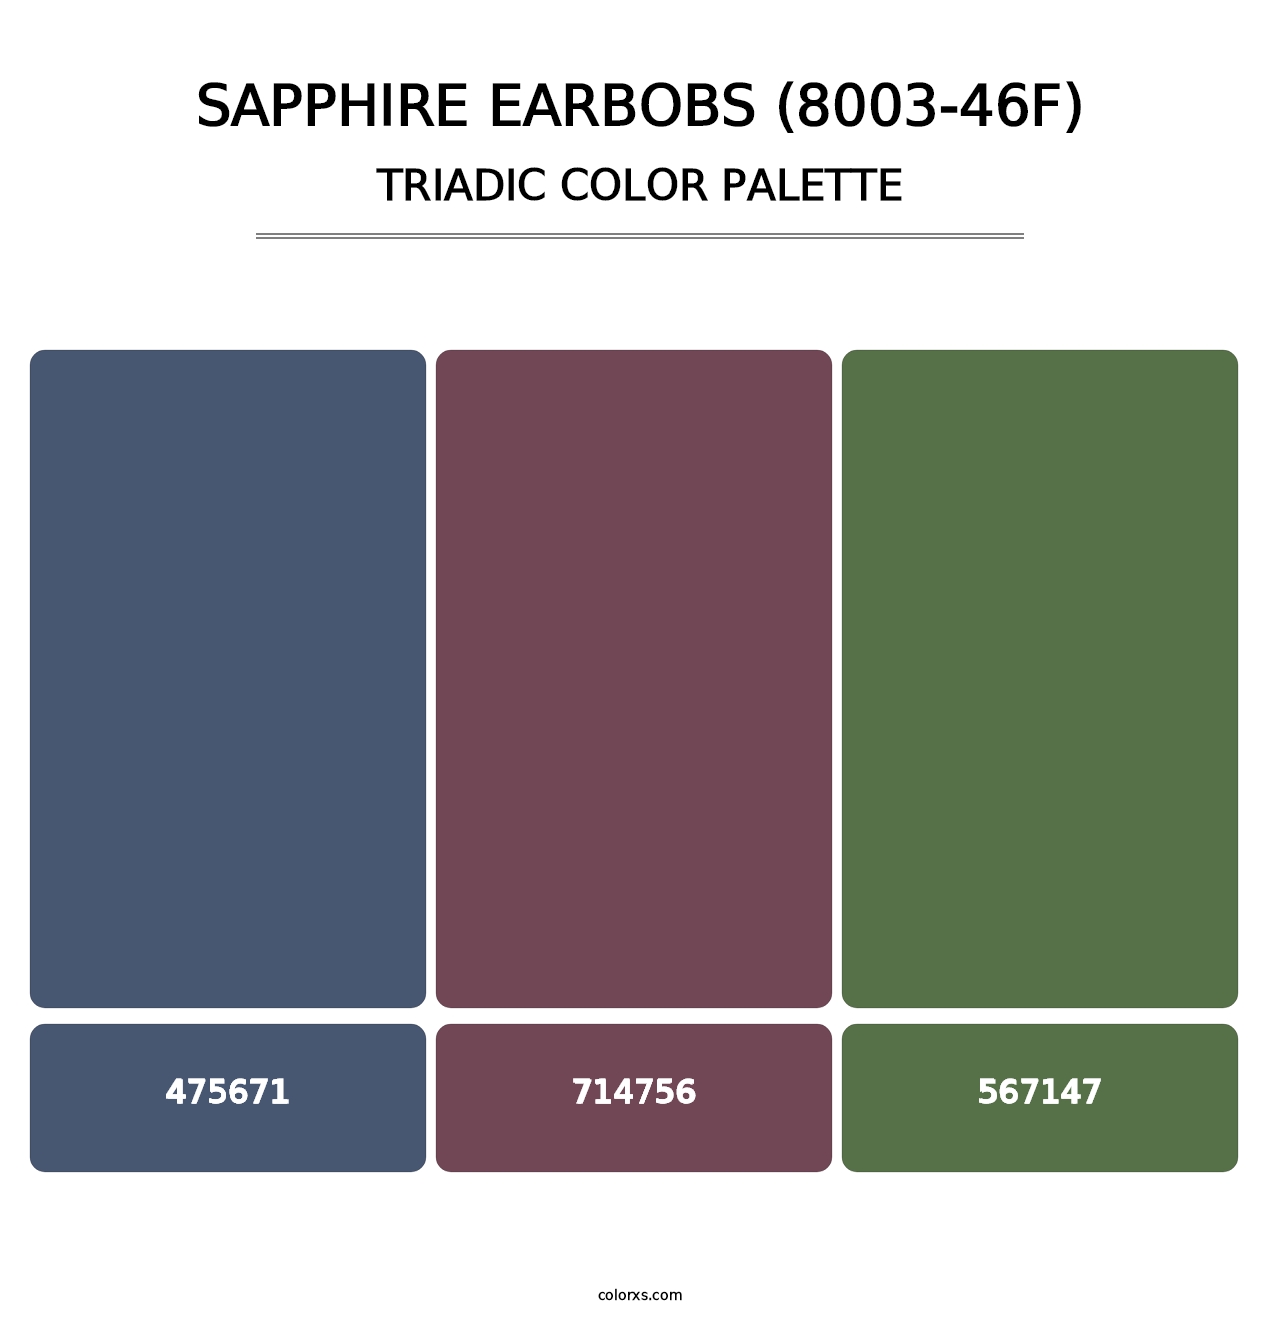 Sapphire Earbobs (8003-46F) - Triadic Color Palette